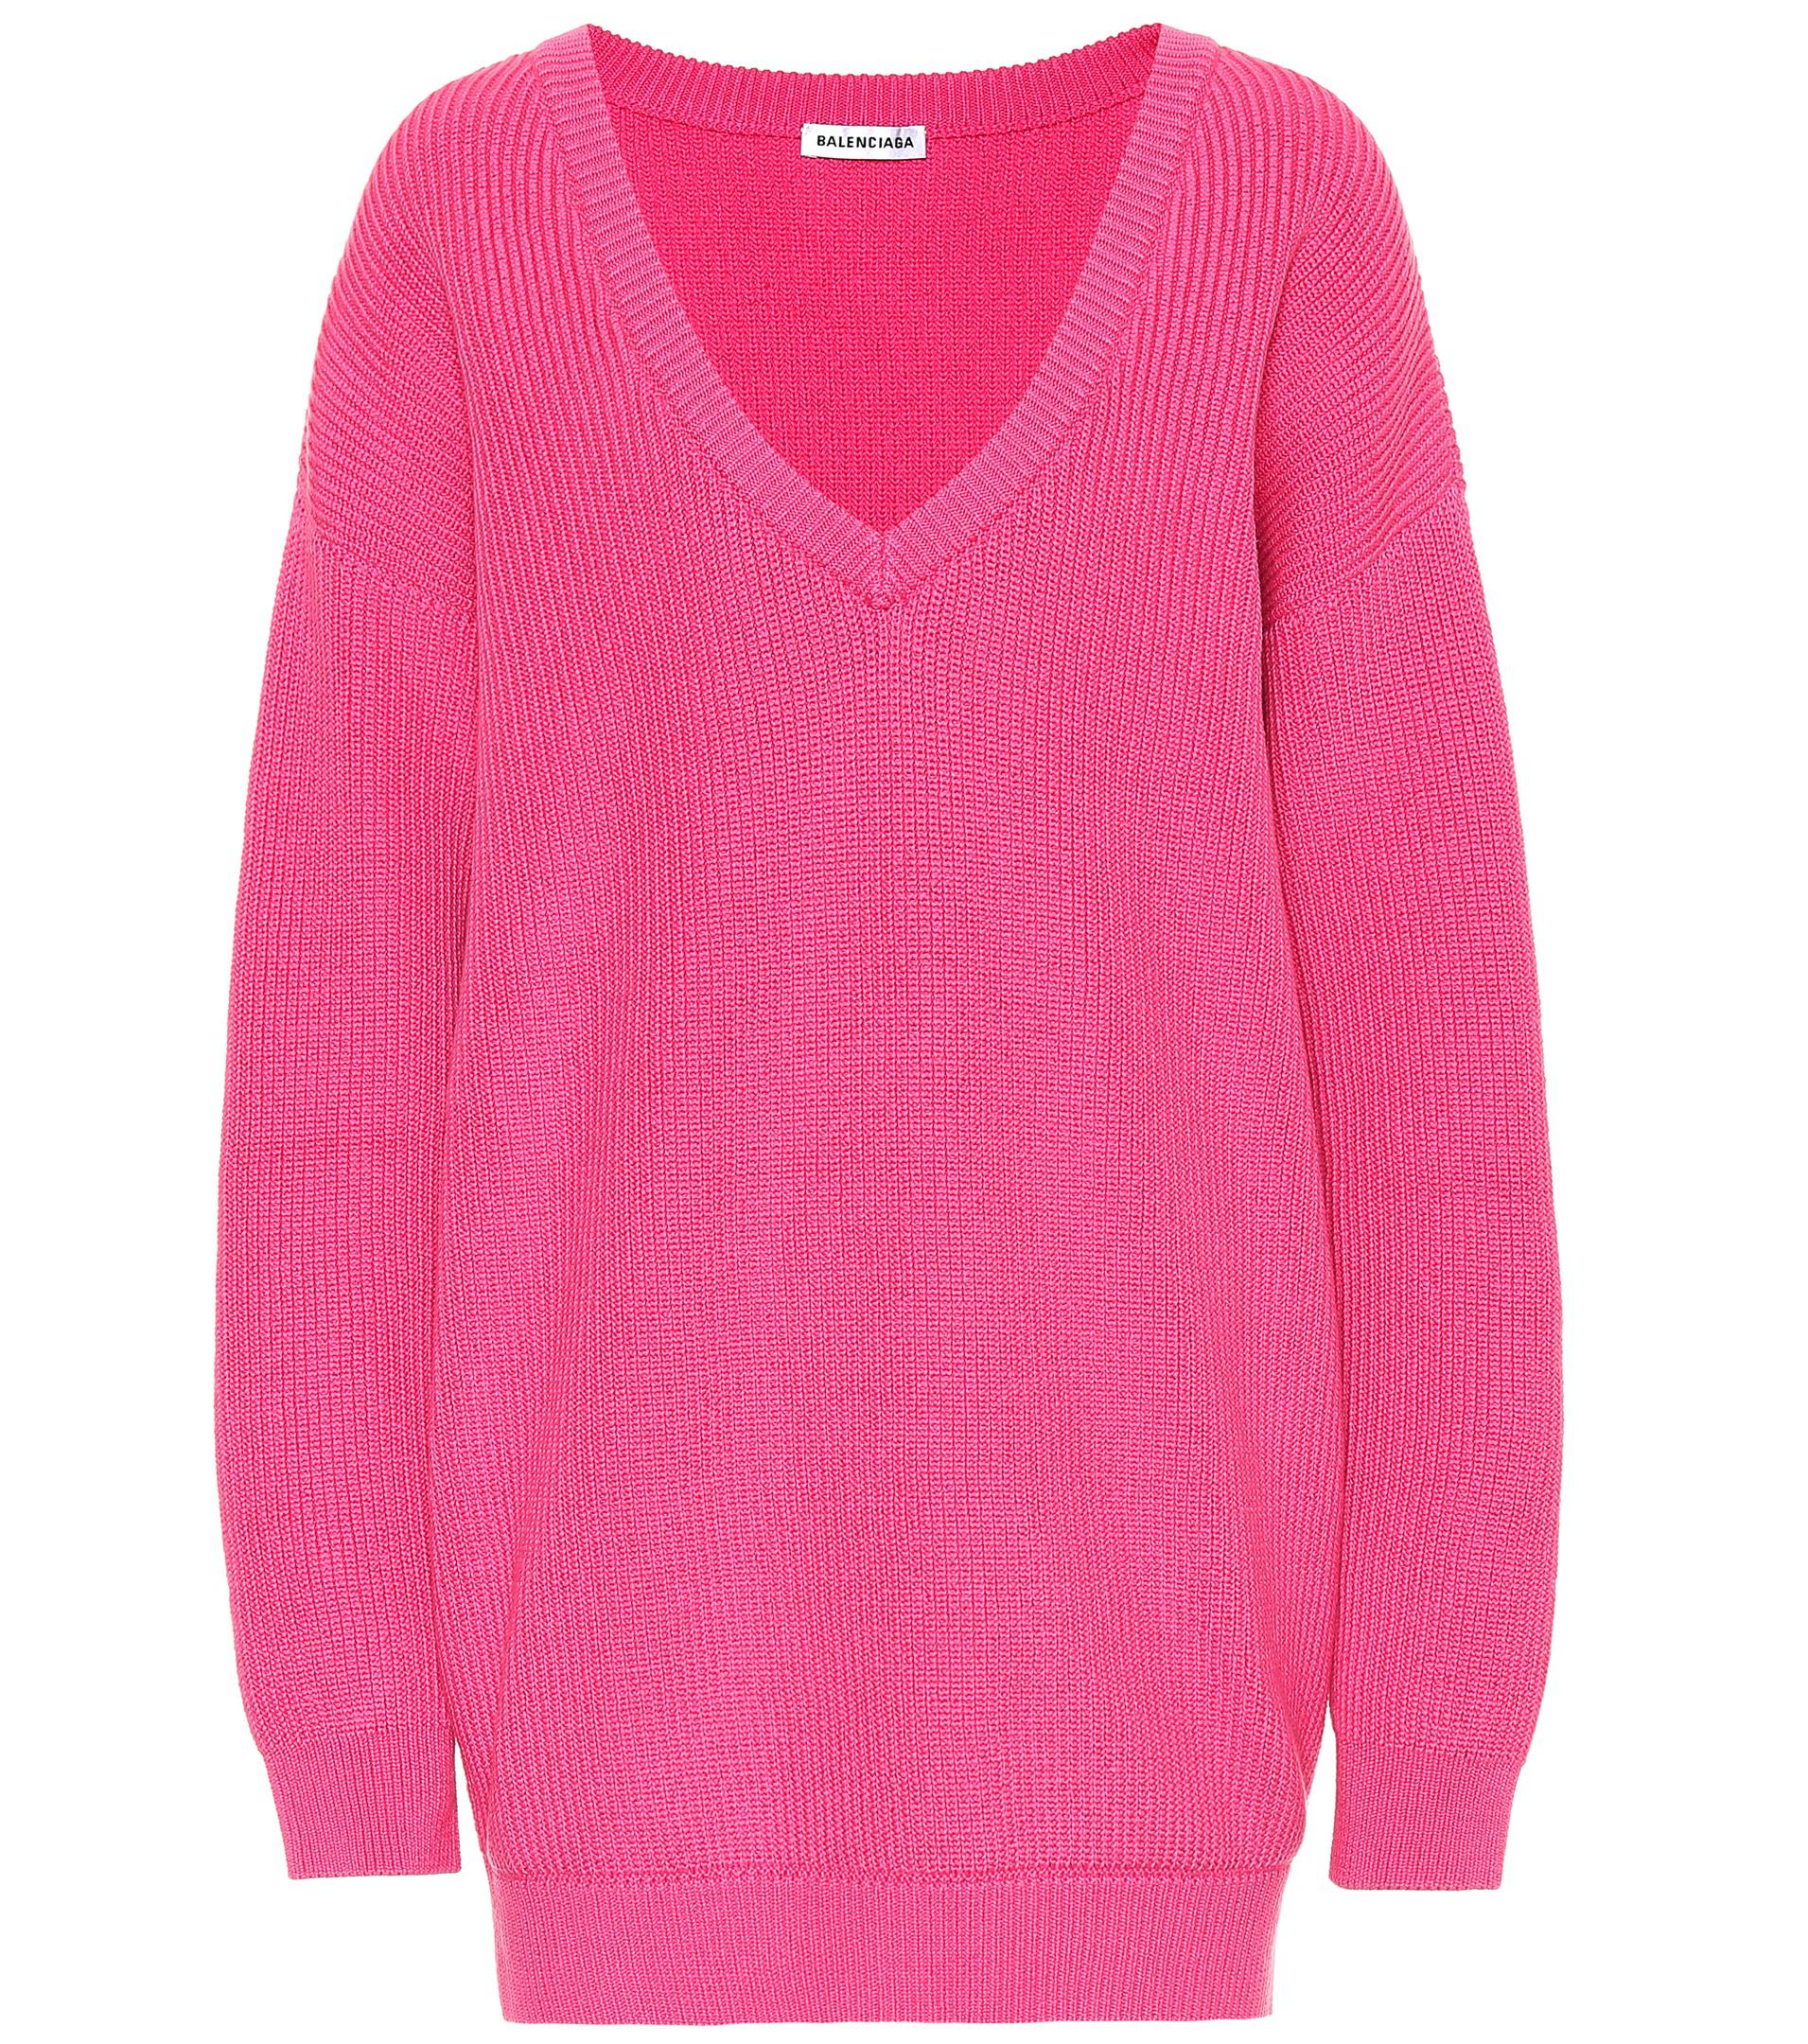 Balenciaga Oversized Cotton-blend Sweater in Rose (Pink) - Lyst